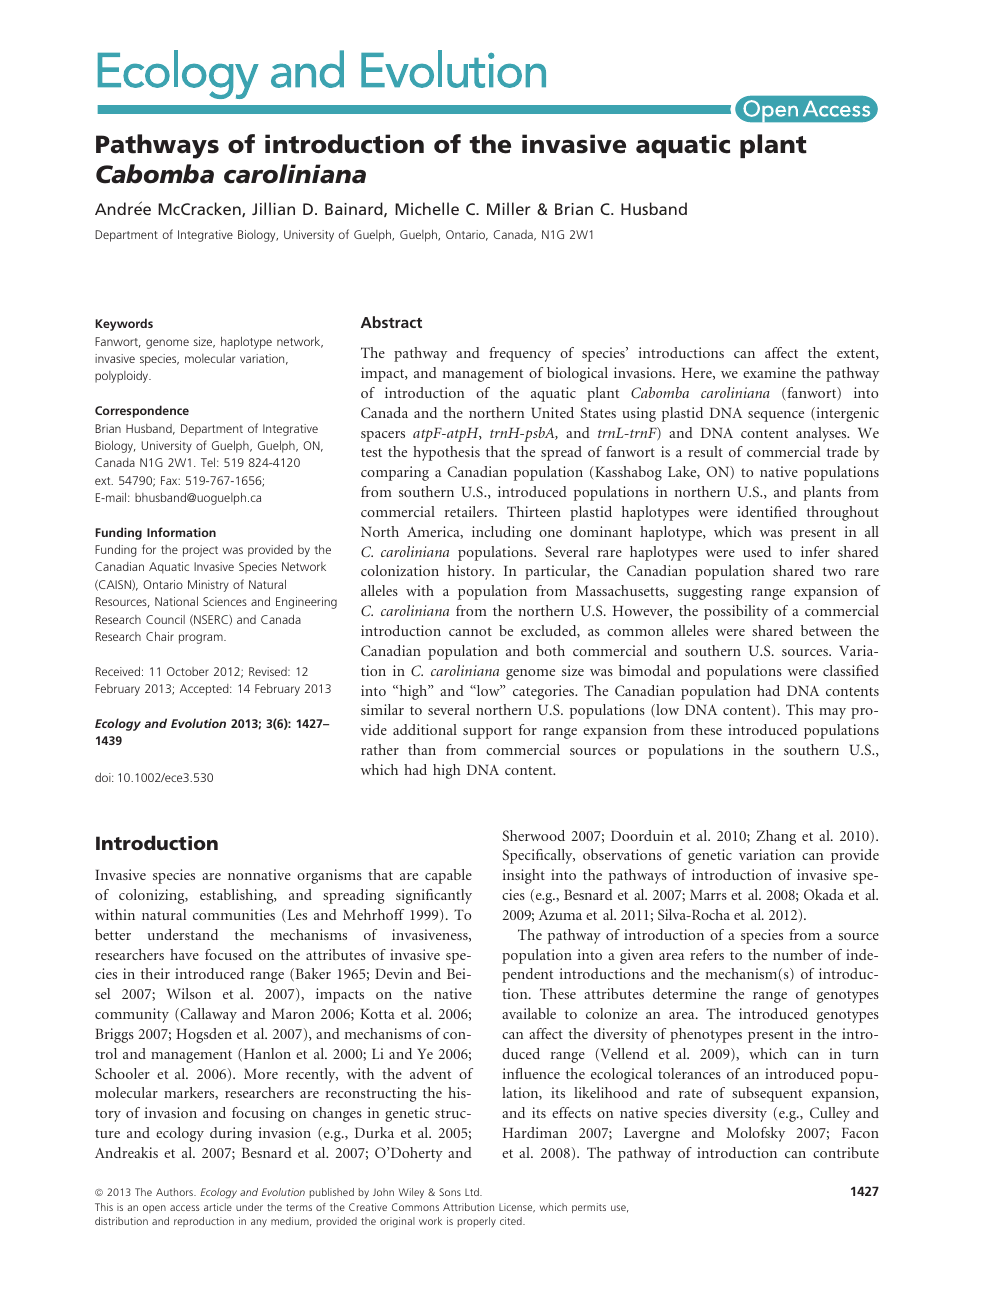 Pathways Of Introduction Of The Invasive Aquatic Plant Cabomba